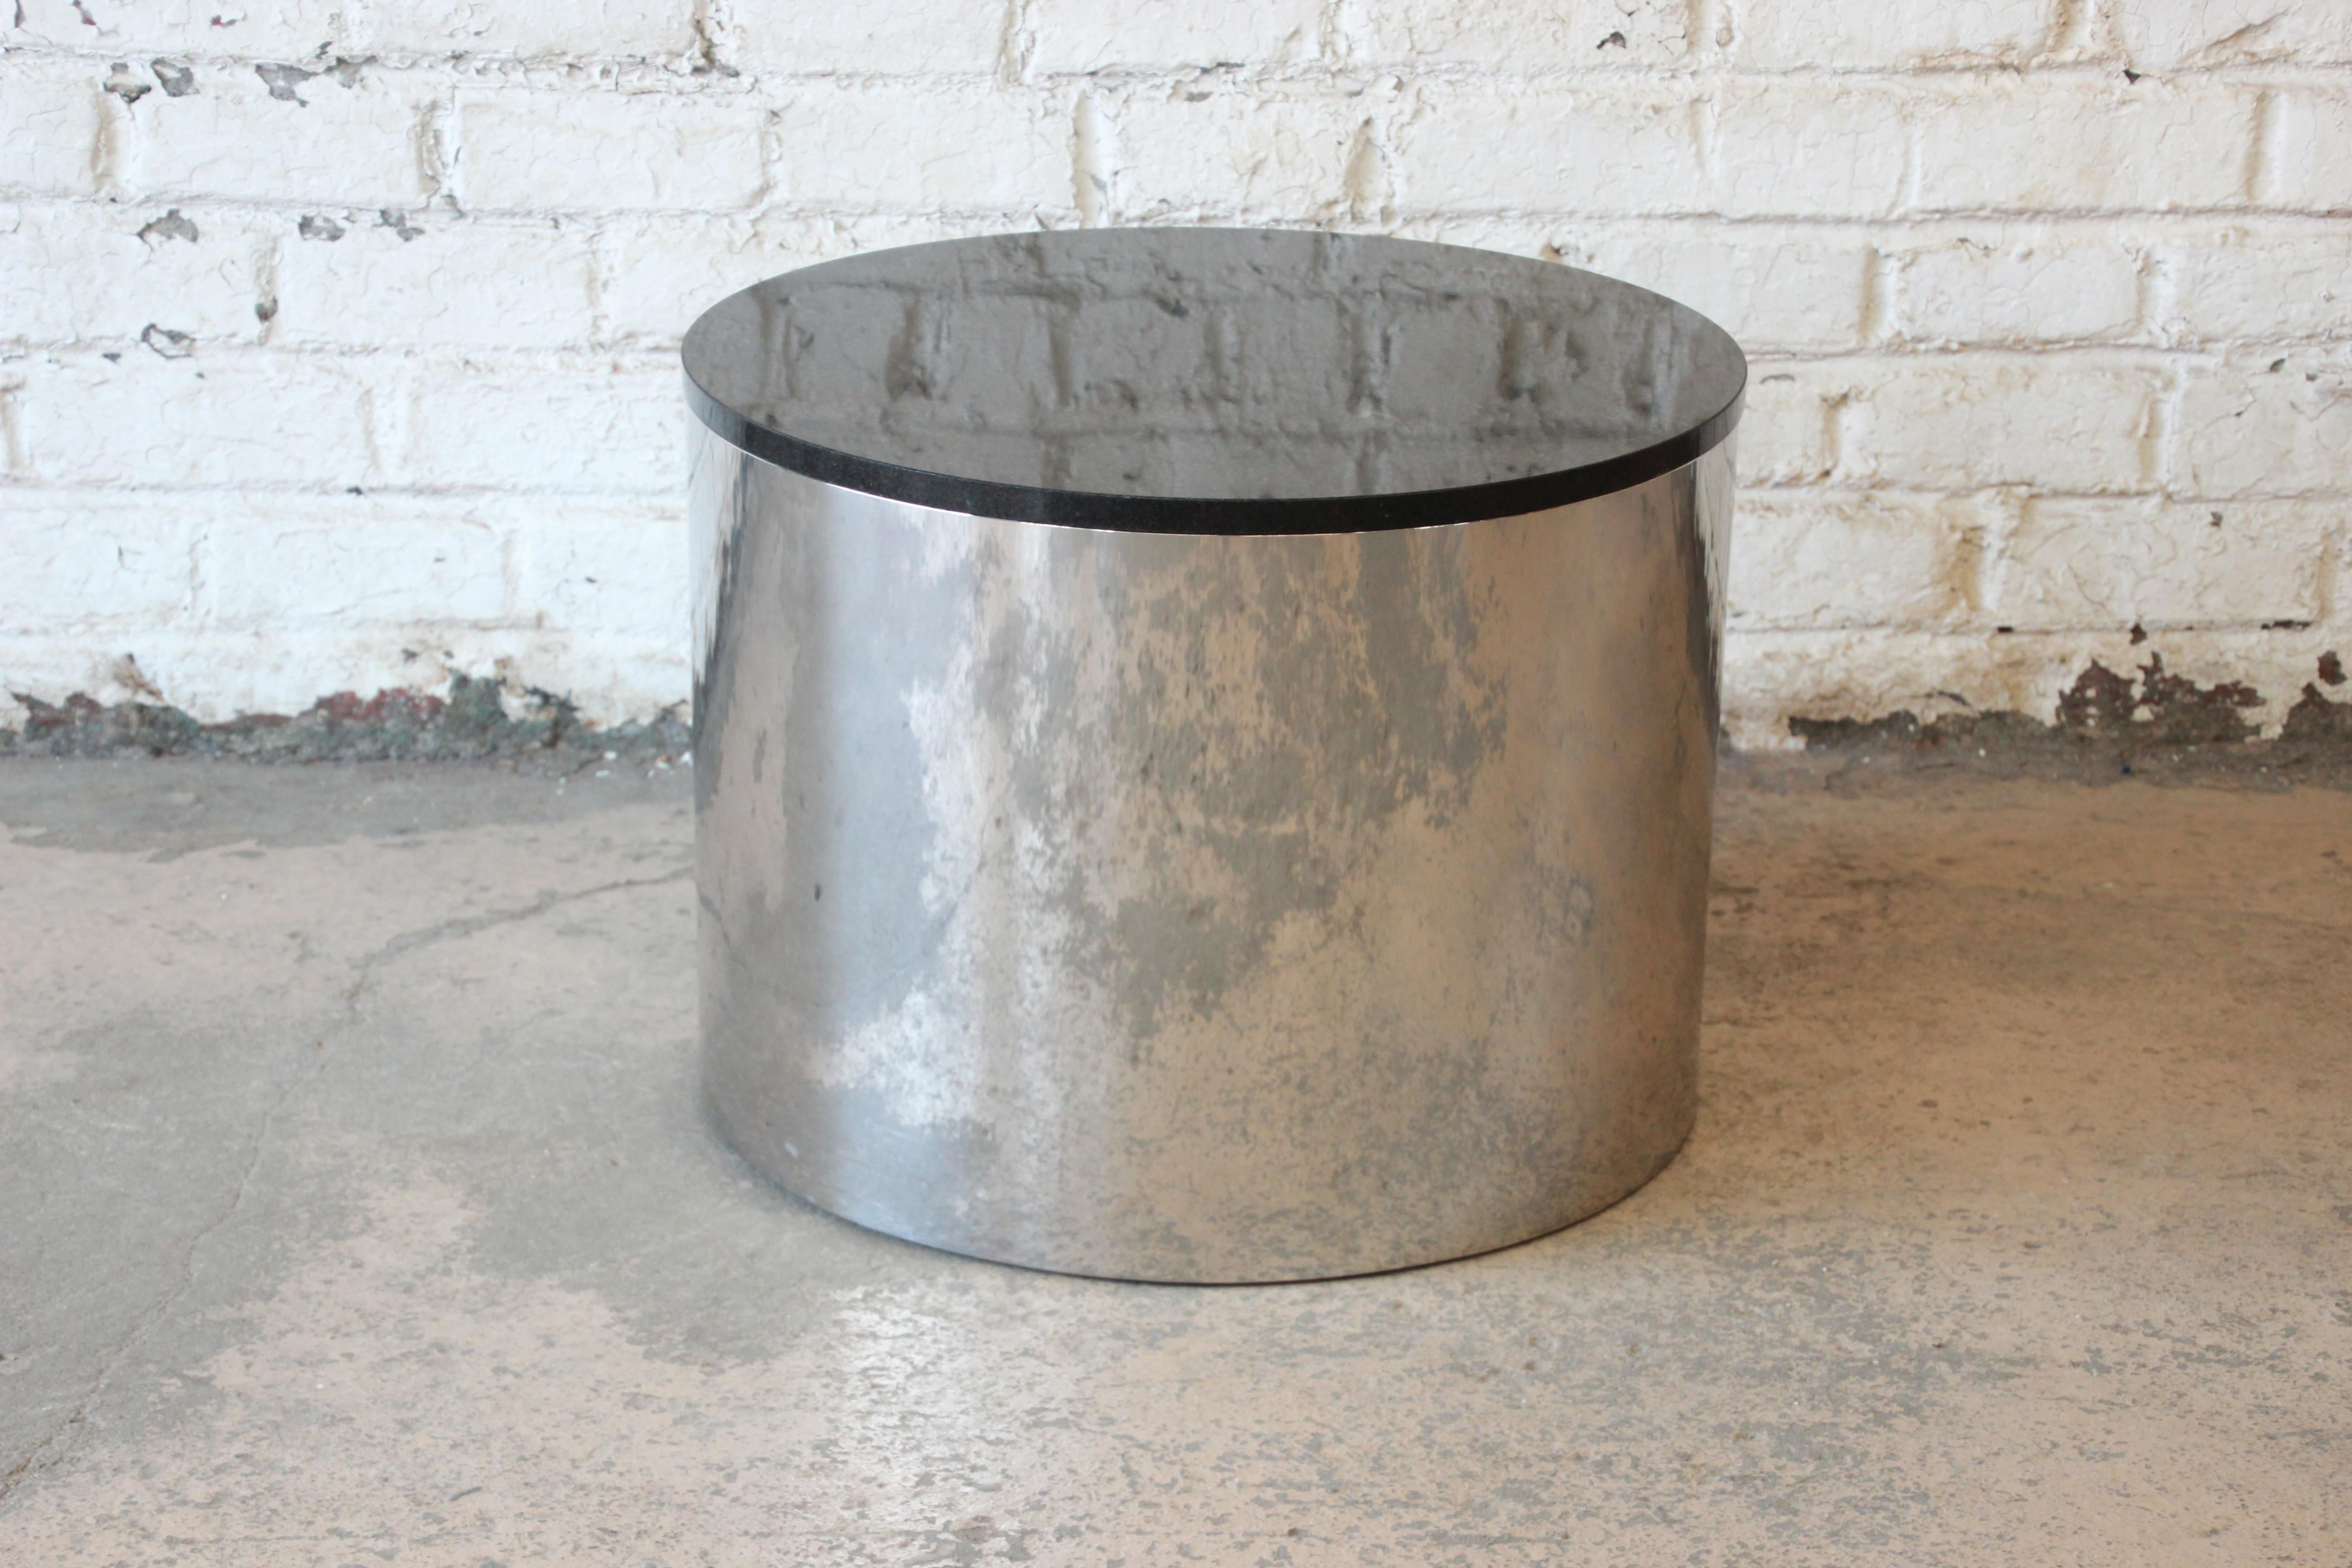 A very nice Mid-Century Modern polished aluminum and black granite top drum cocktail table designed by Paul Mayen for Habitat. The table is in very good original condition, with minimal wear from age and use. A perfect addition to any modern